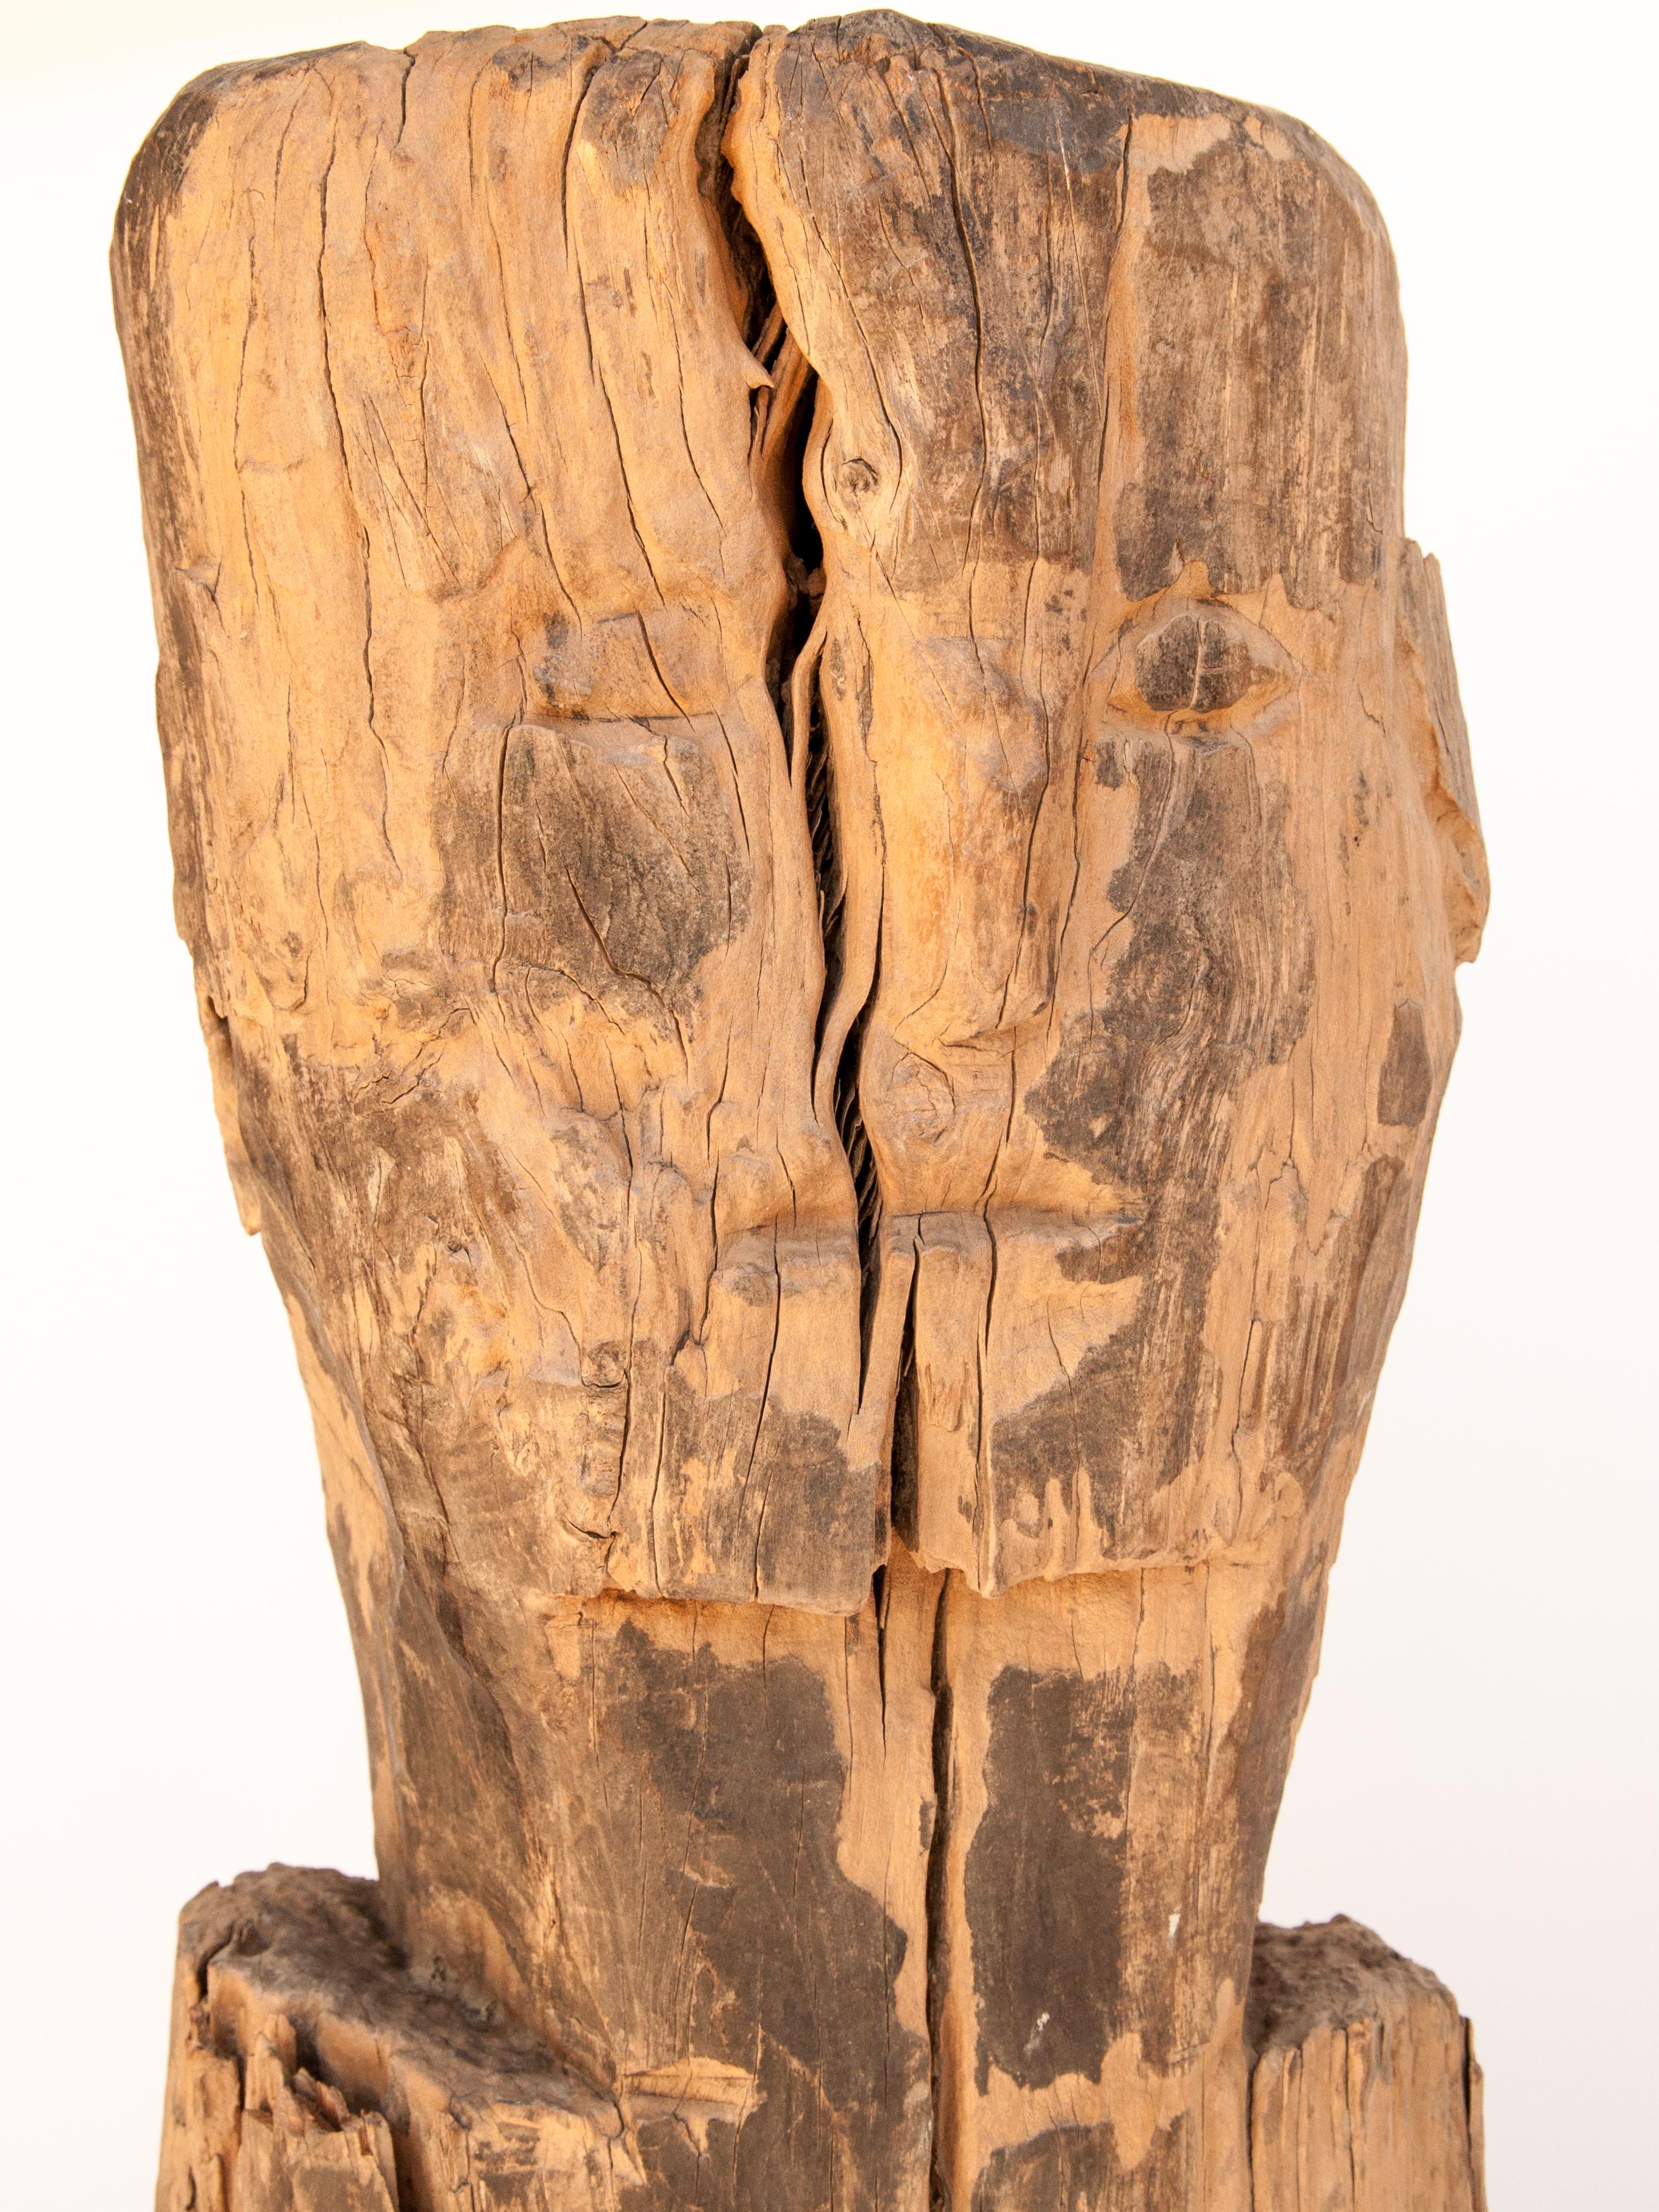 Hand-Carved Wooden Tribal Statue or Bridge Figure from West Nepal, Early to Mid-20th Century